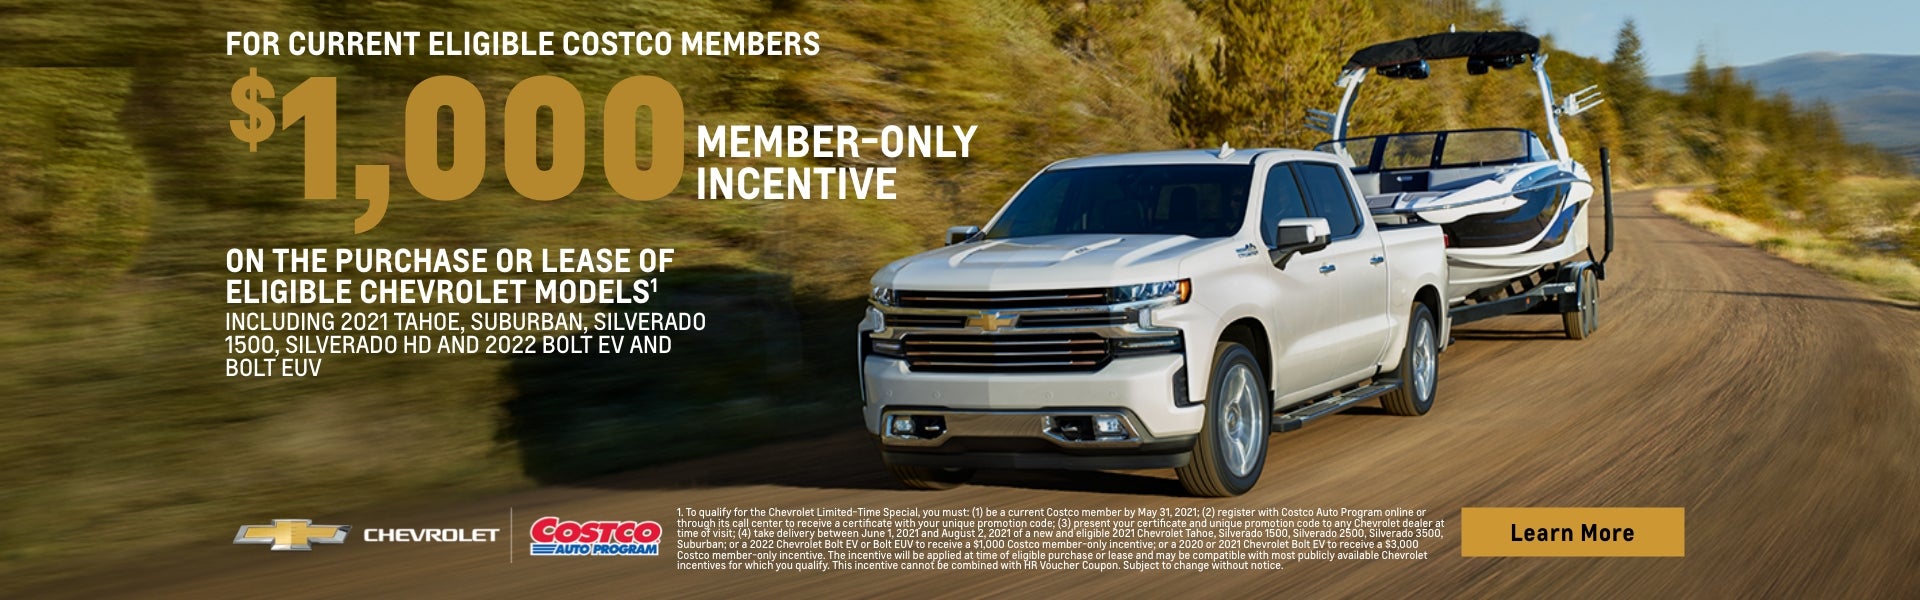 2021 Silverado 1500 $1,000 member-only incentive on the pu